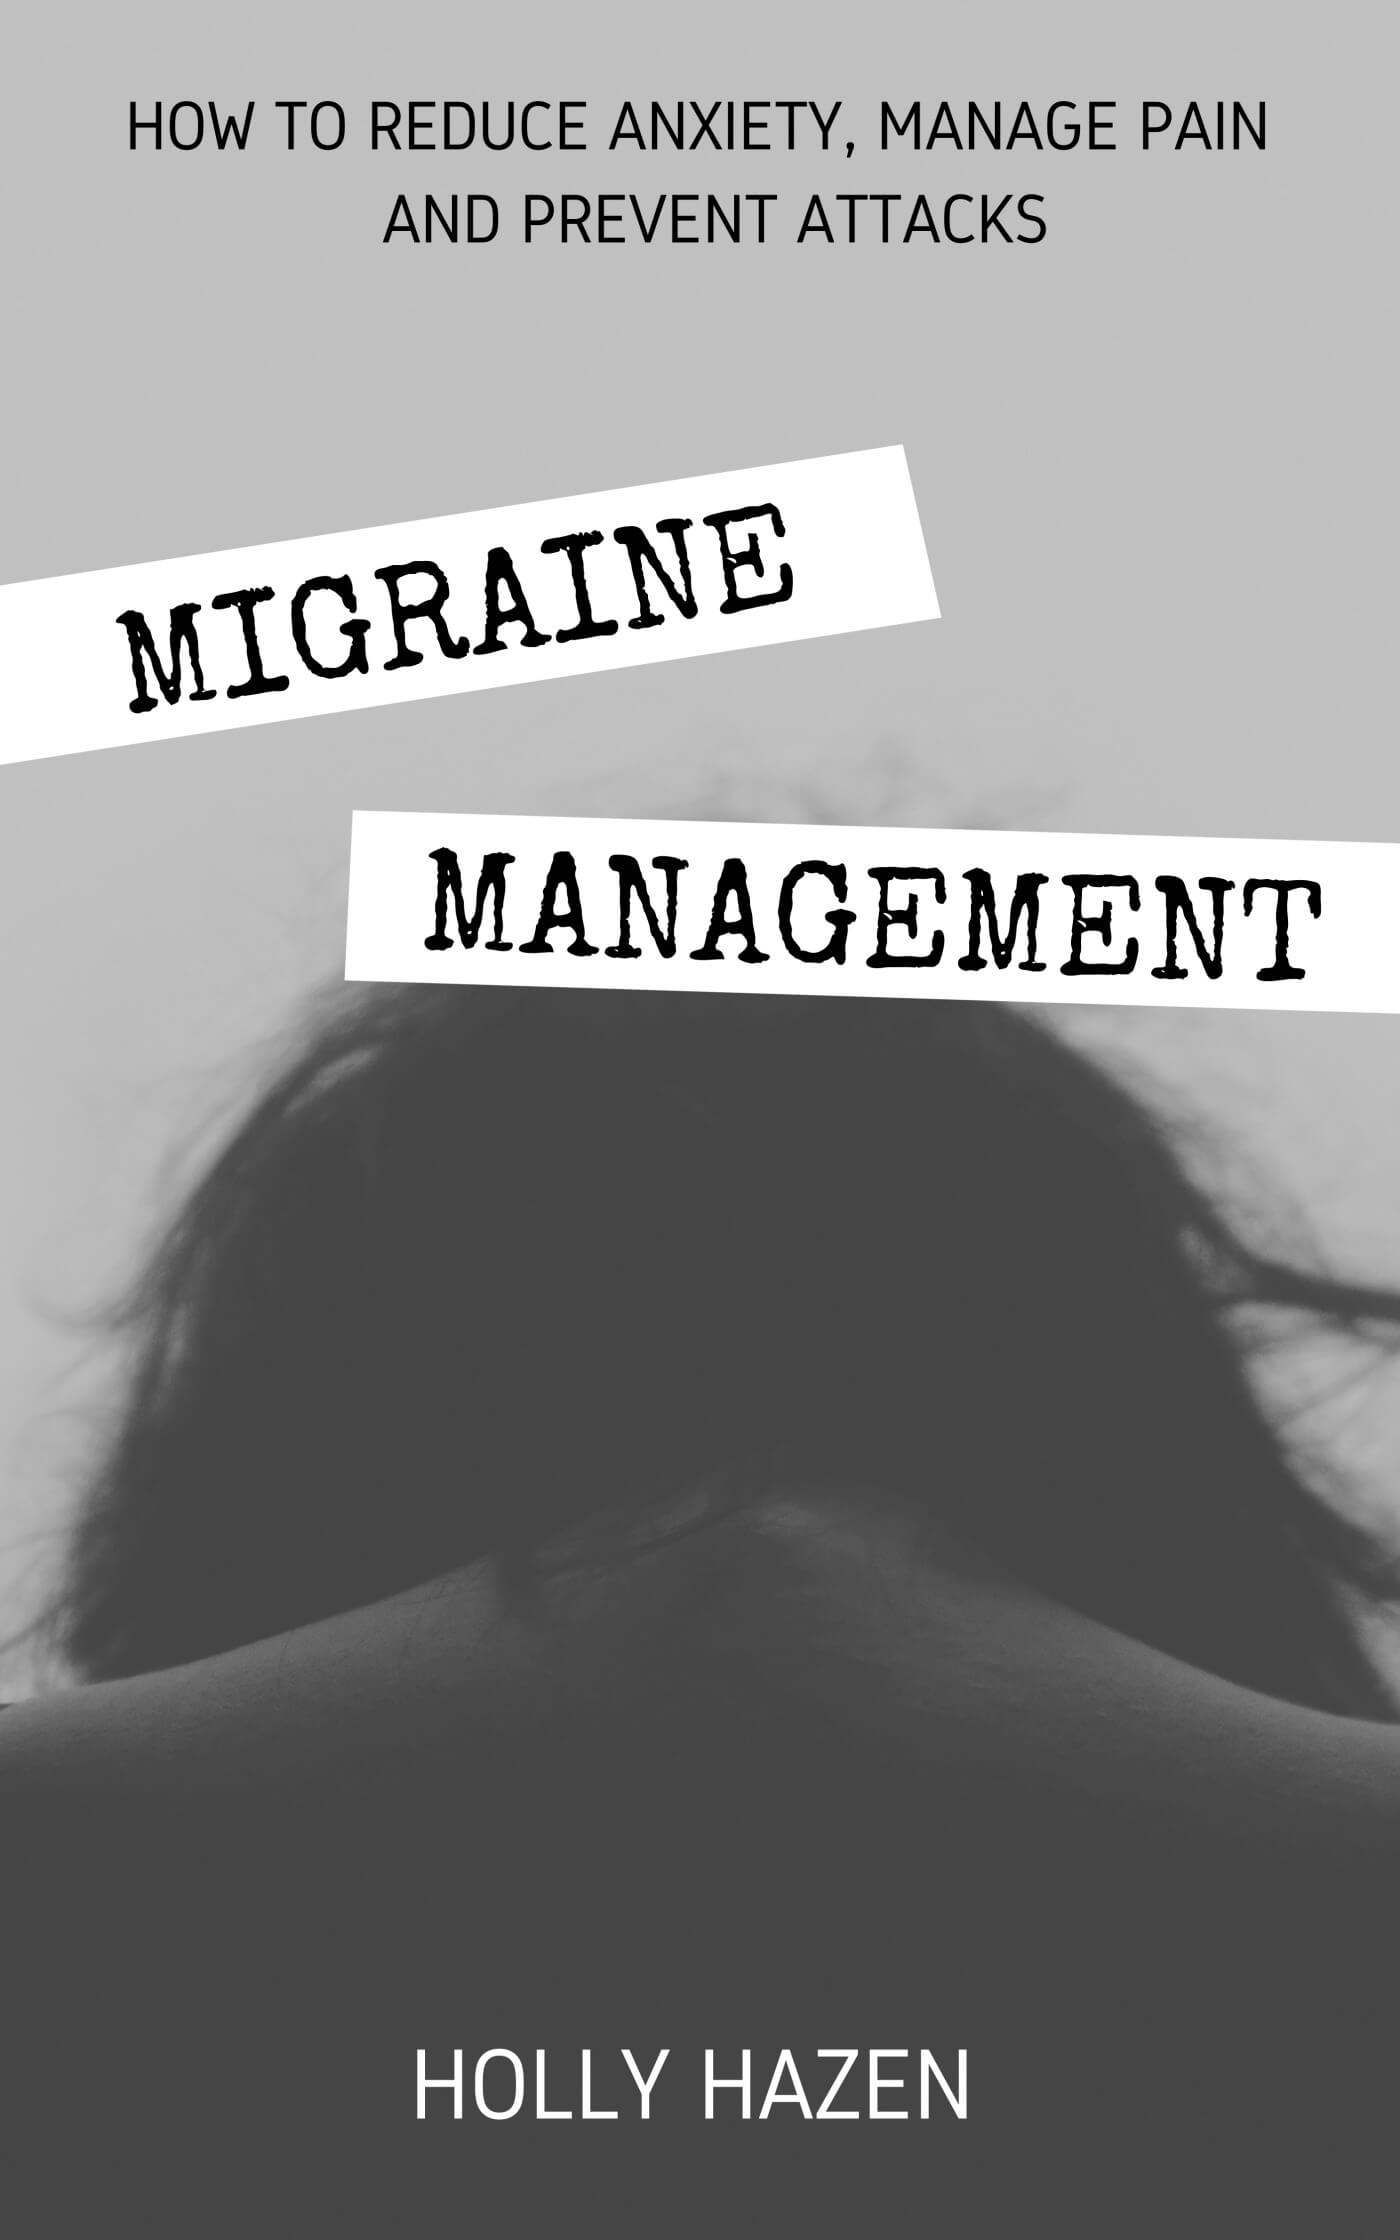 FREE: Migraine Management: How to Reduce Anxiety, Manage Pain and Prevent Attacks by Holly Hazen